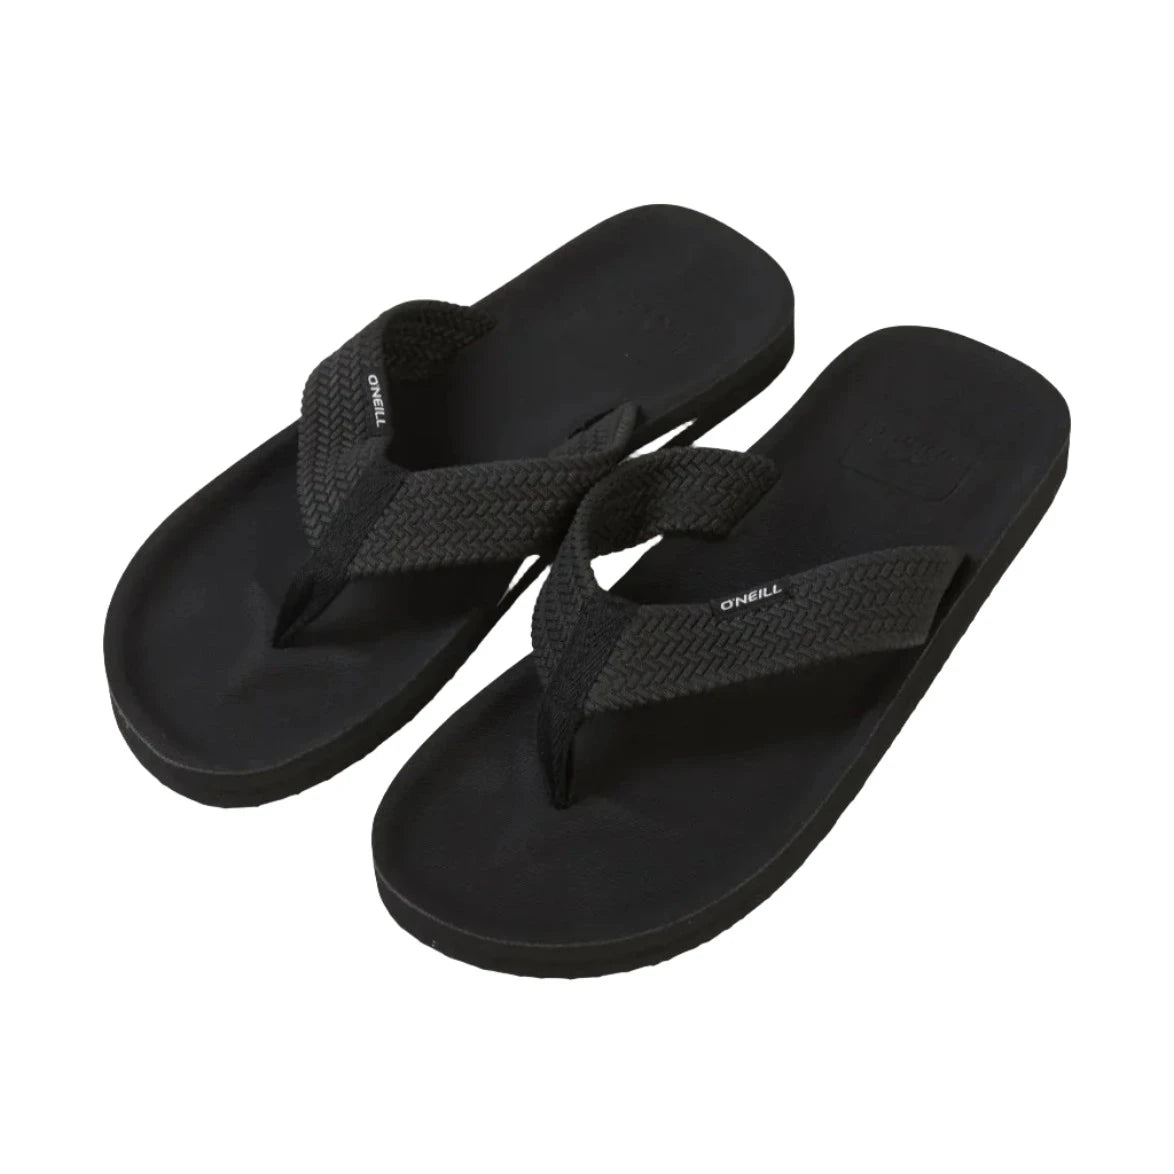 O'Neill Chad Sandals in Blackout